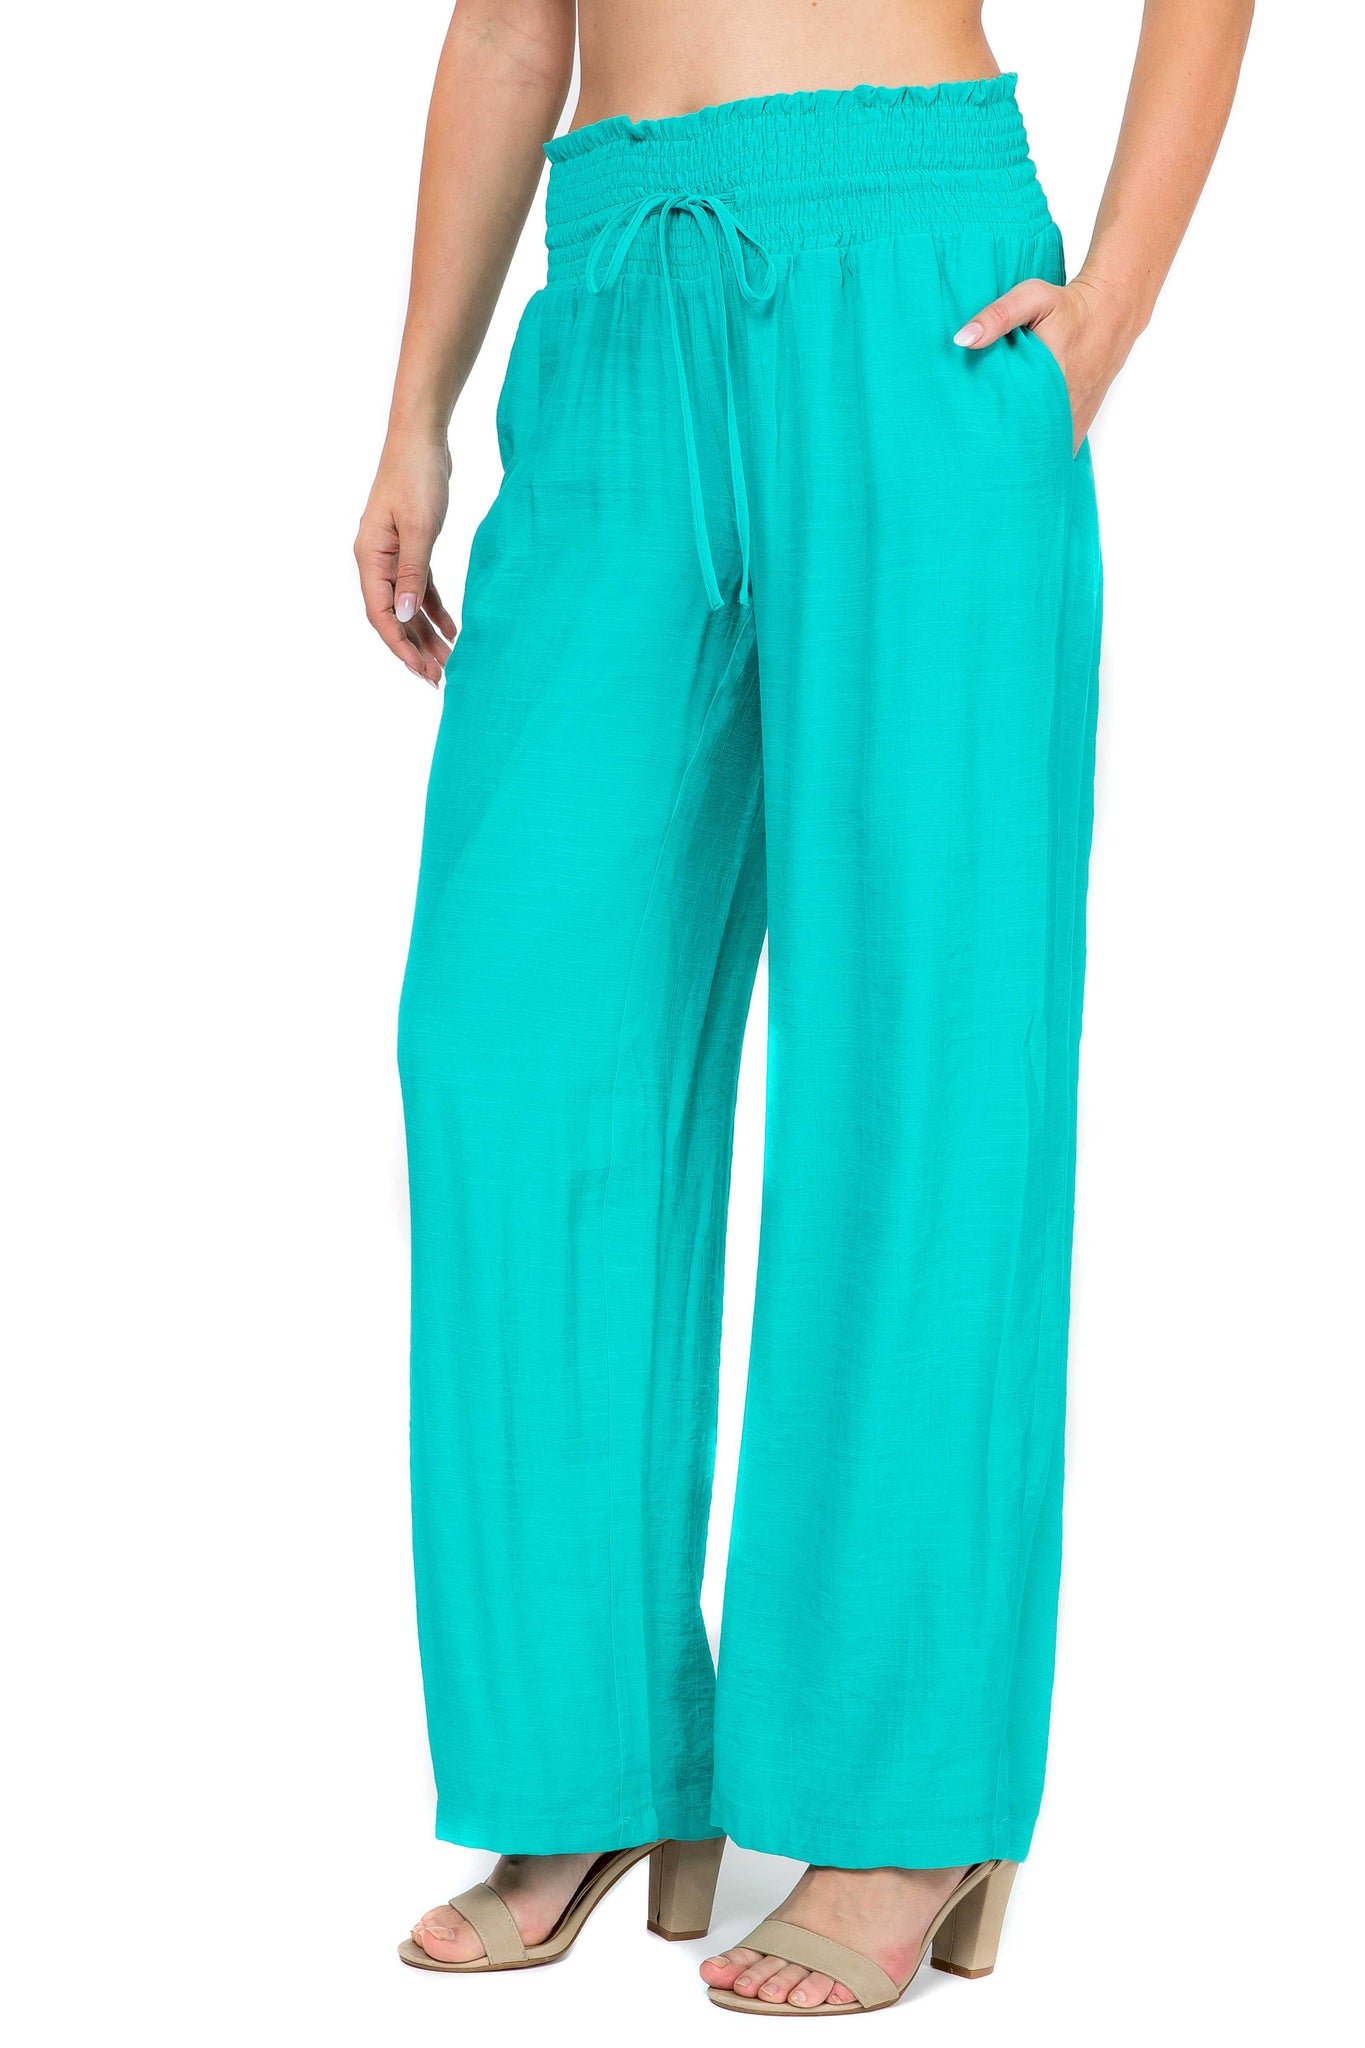 Women's Casual Resort Wear Drawstring Pant - Mojito Collection - Vacation Clothing, Women's Casual Pants, Women's Clothing, Women's Resort Wear